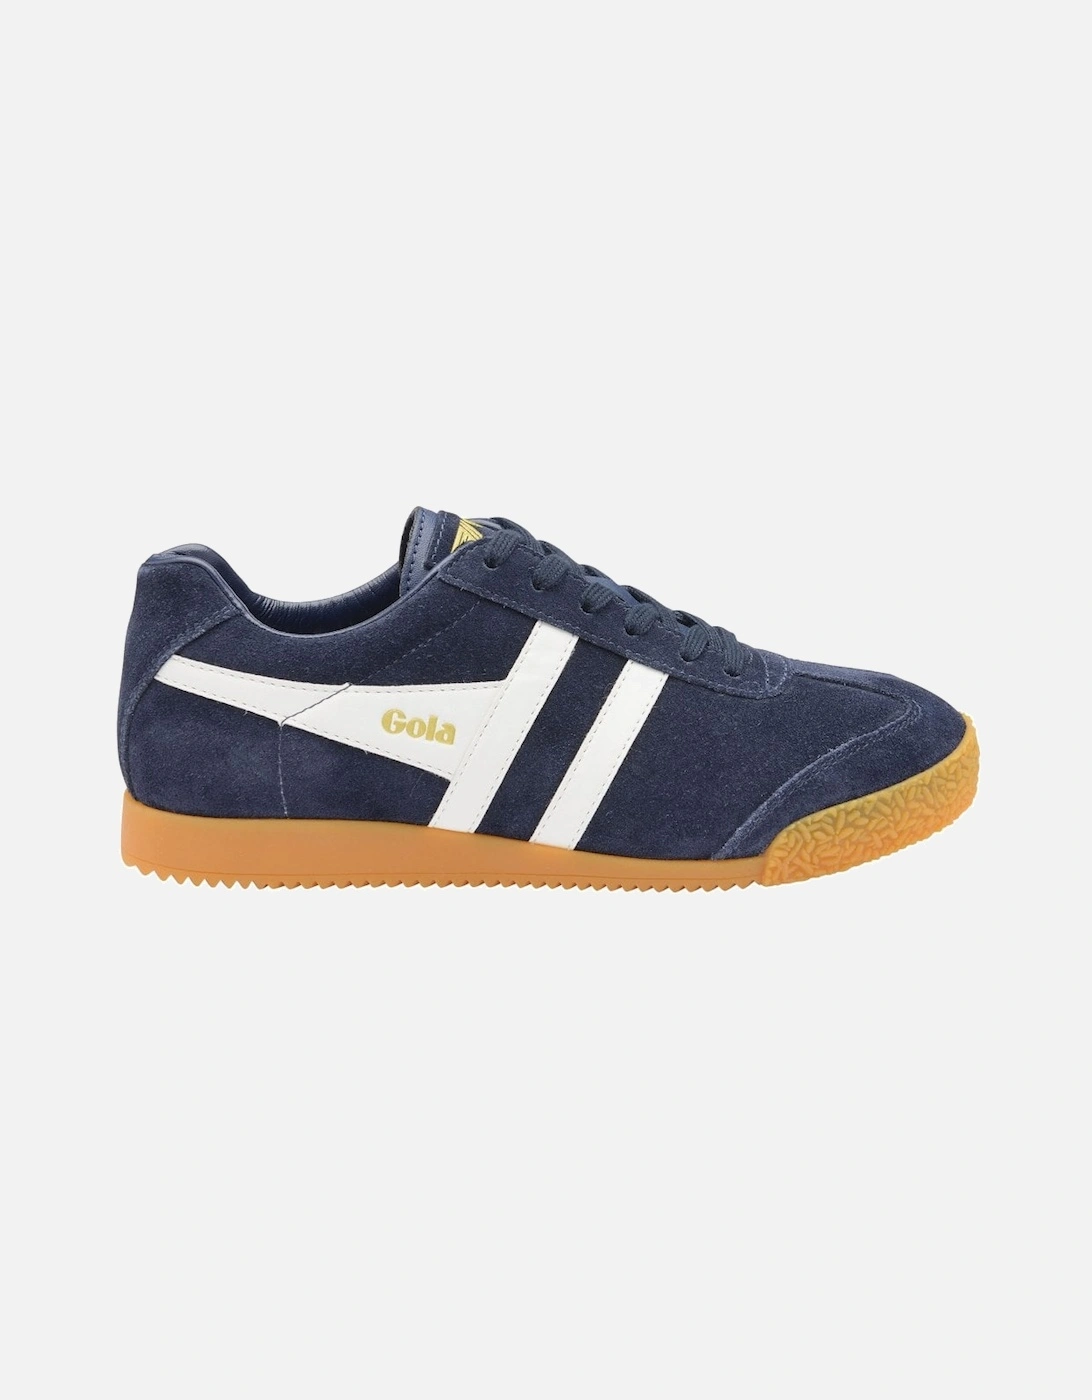 Harrier Suede Womens Trainers